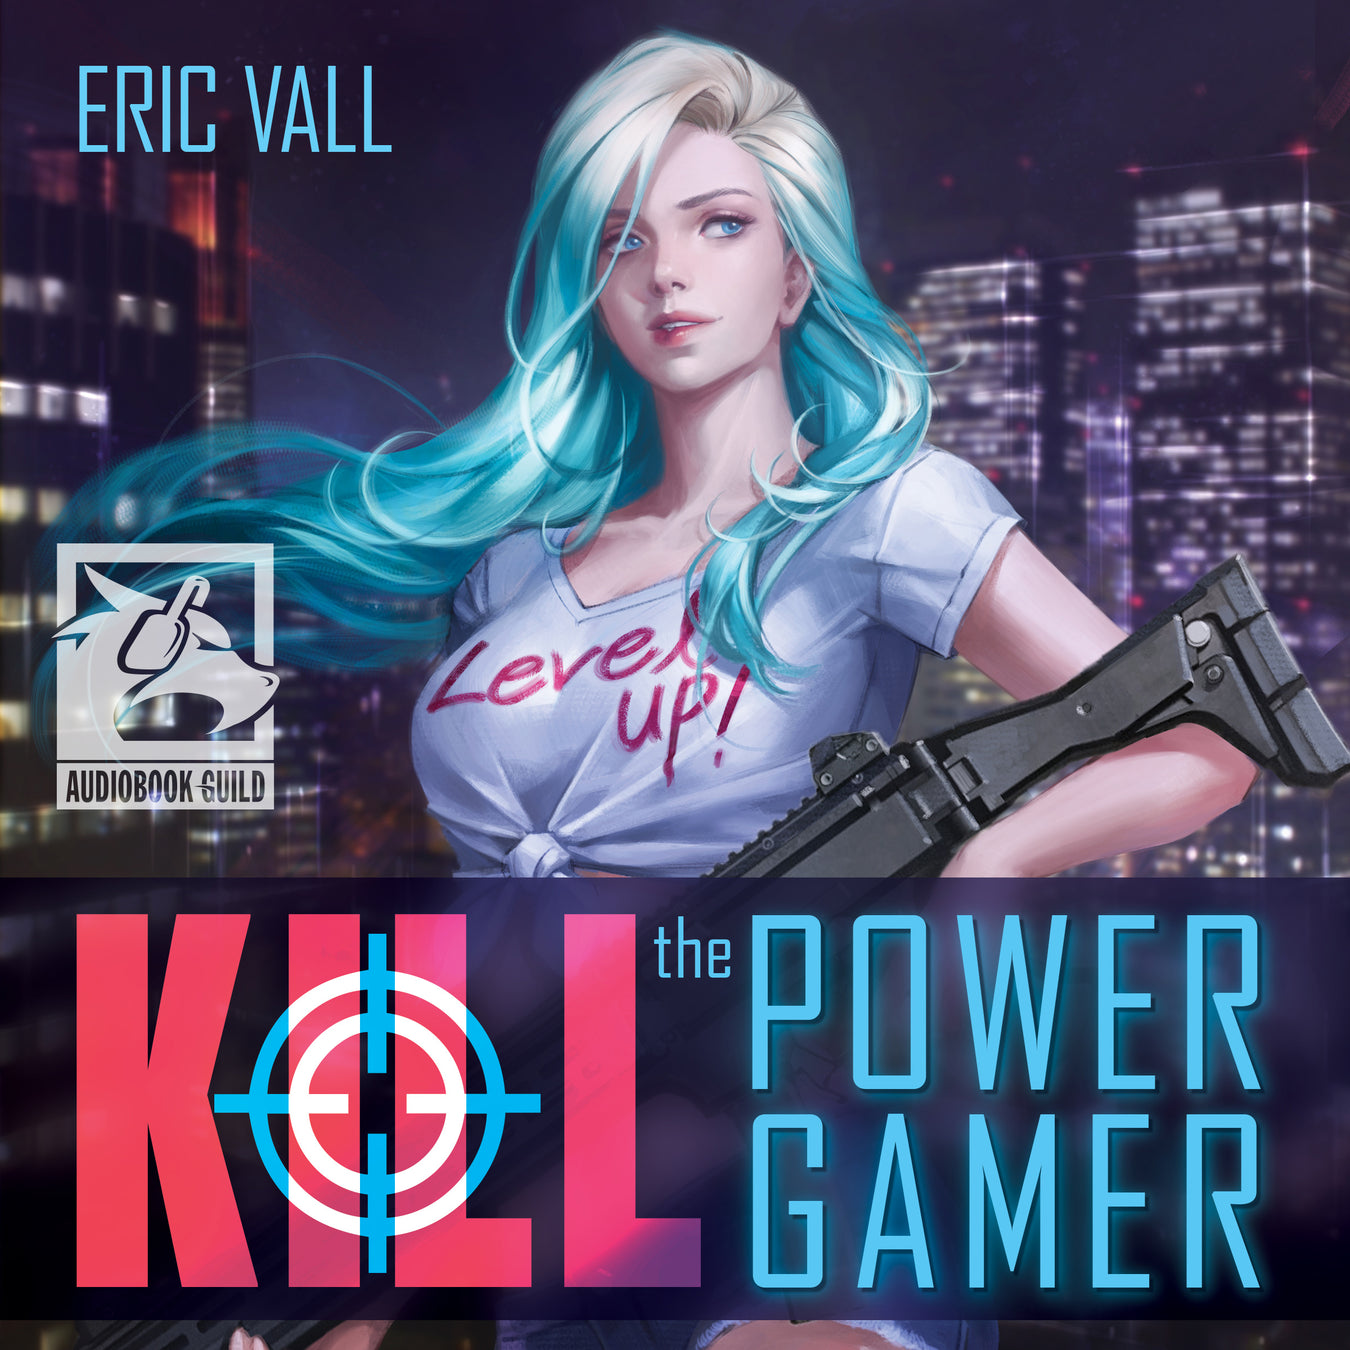 Kill The Power Gamer by Eric Vall